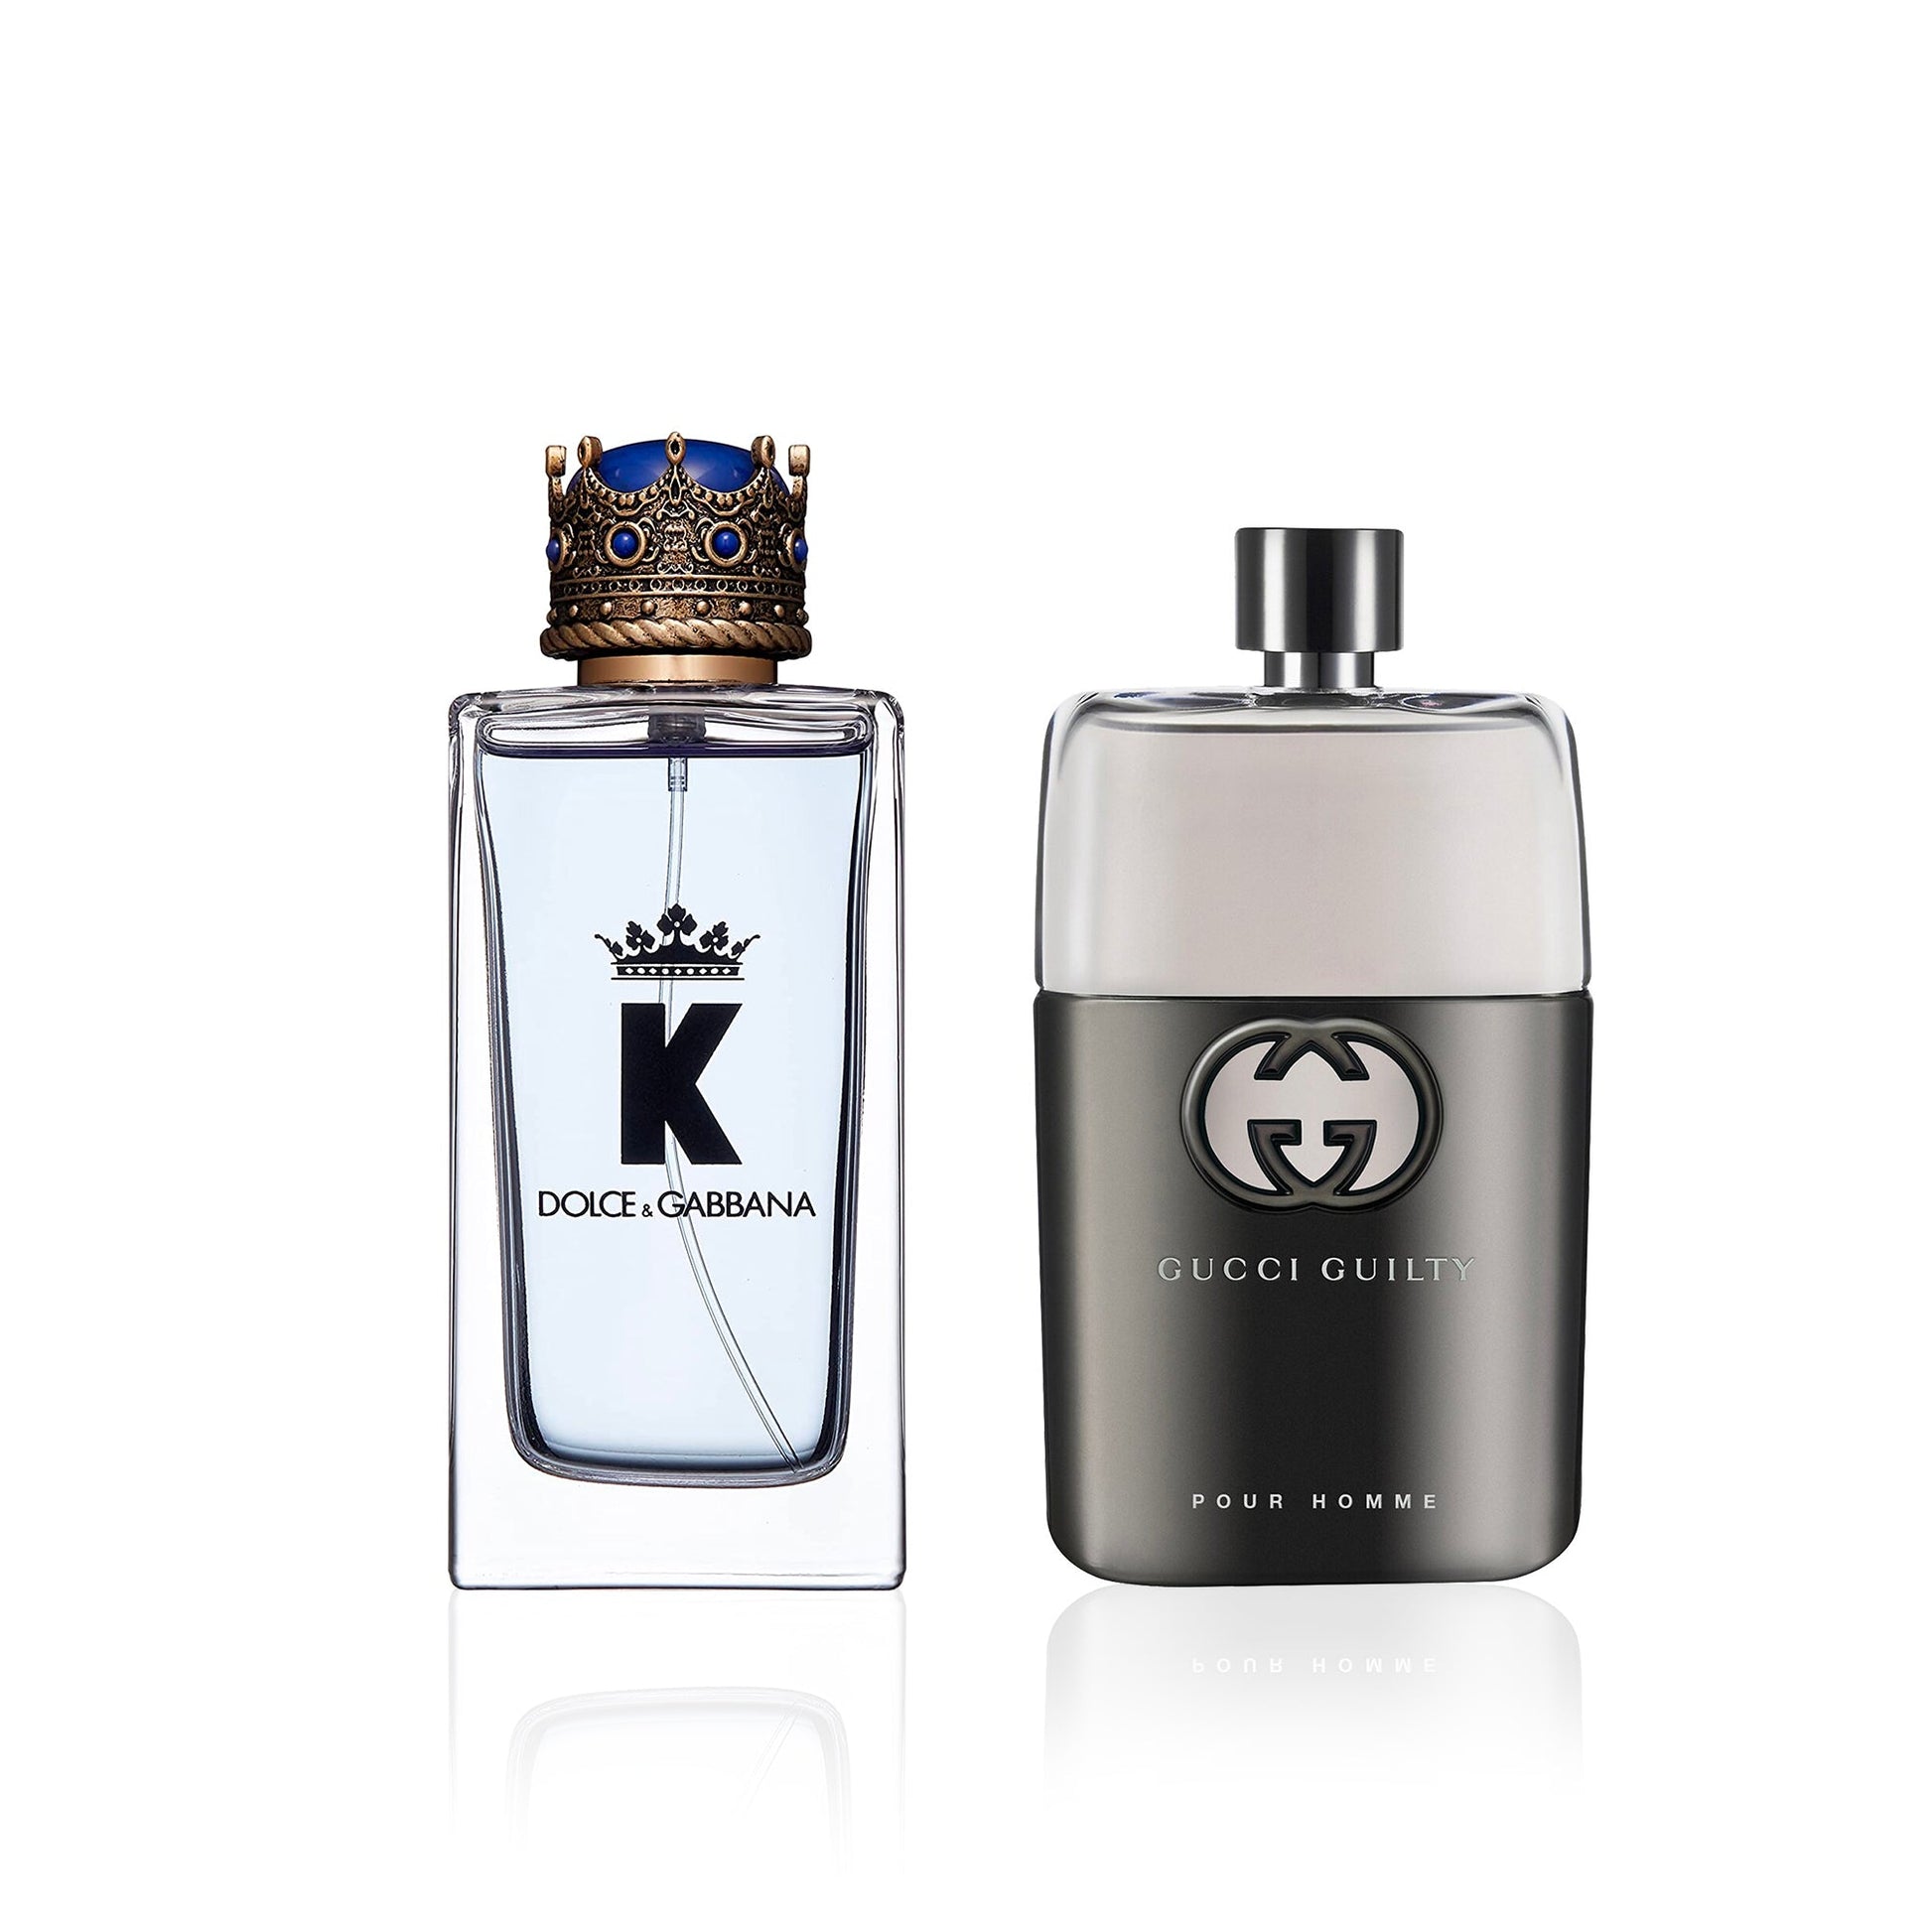 Bundle for Men: K by Dolce & Gabbana and Gucci Guilty by Gucci, Product image 1